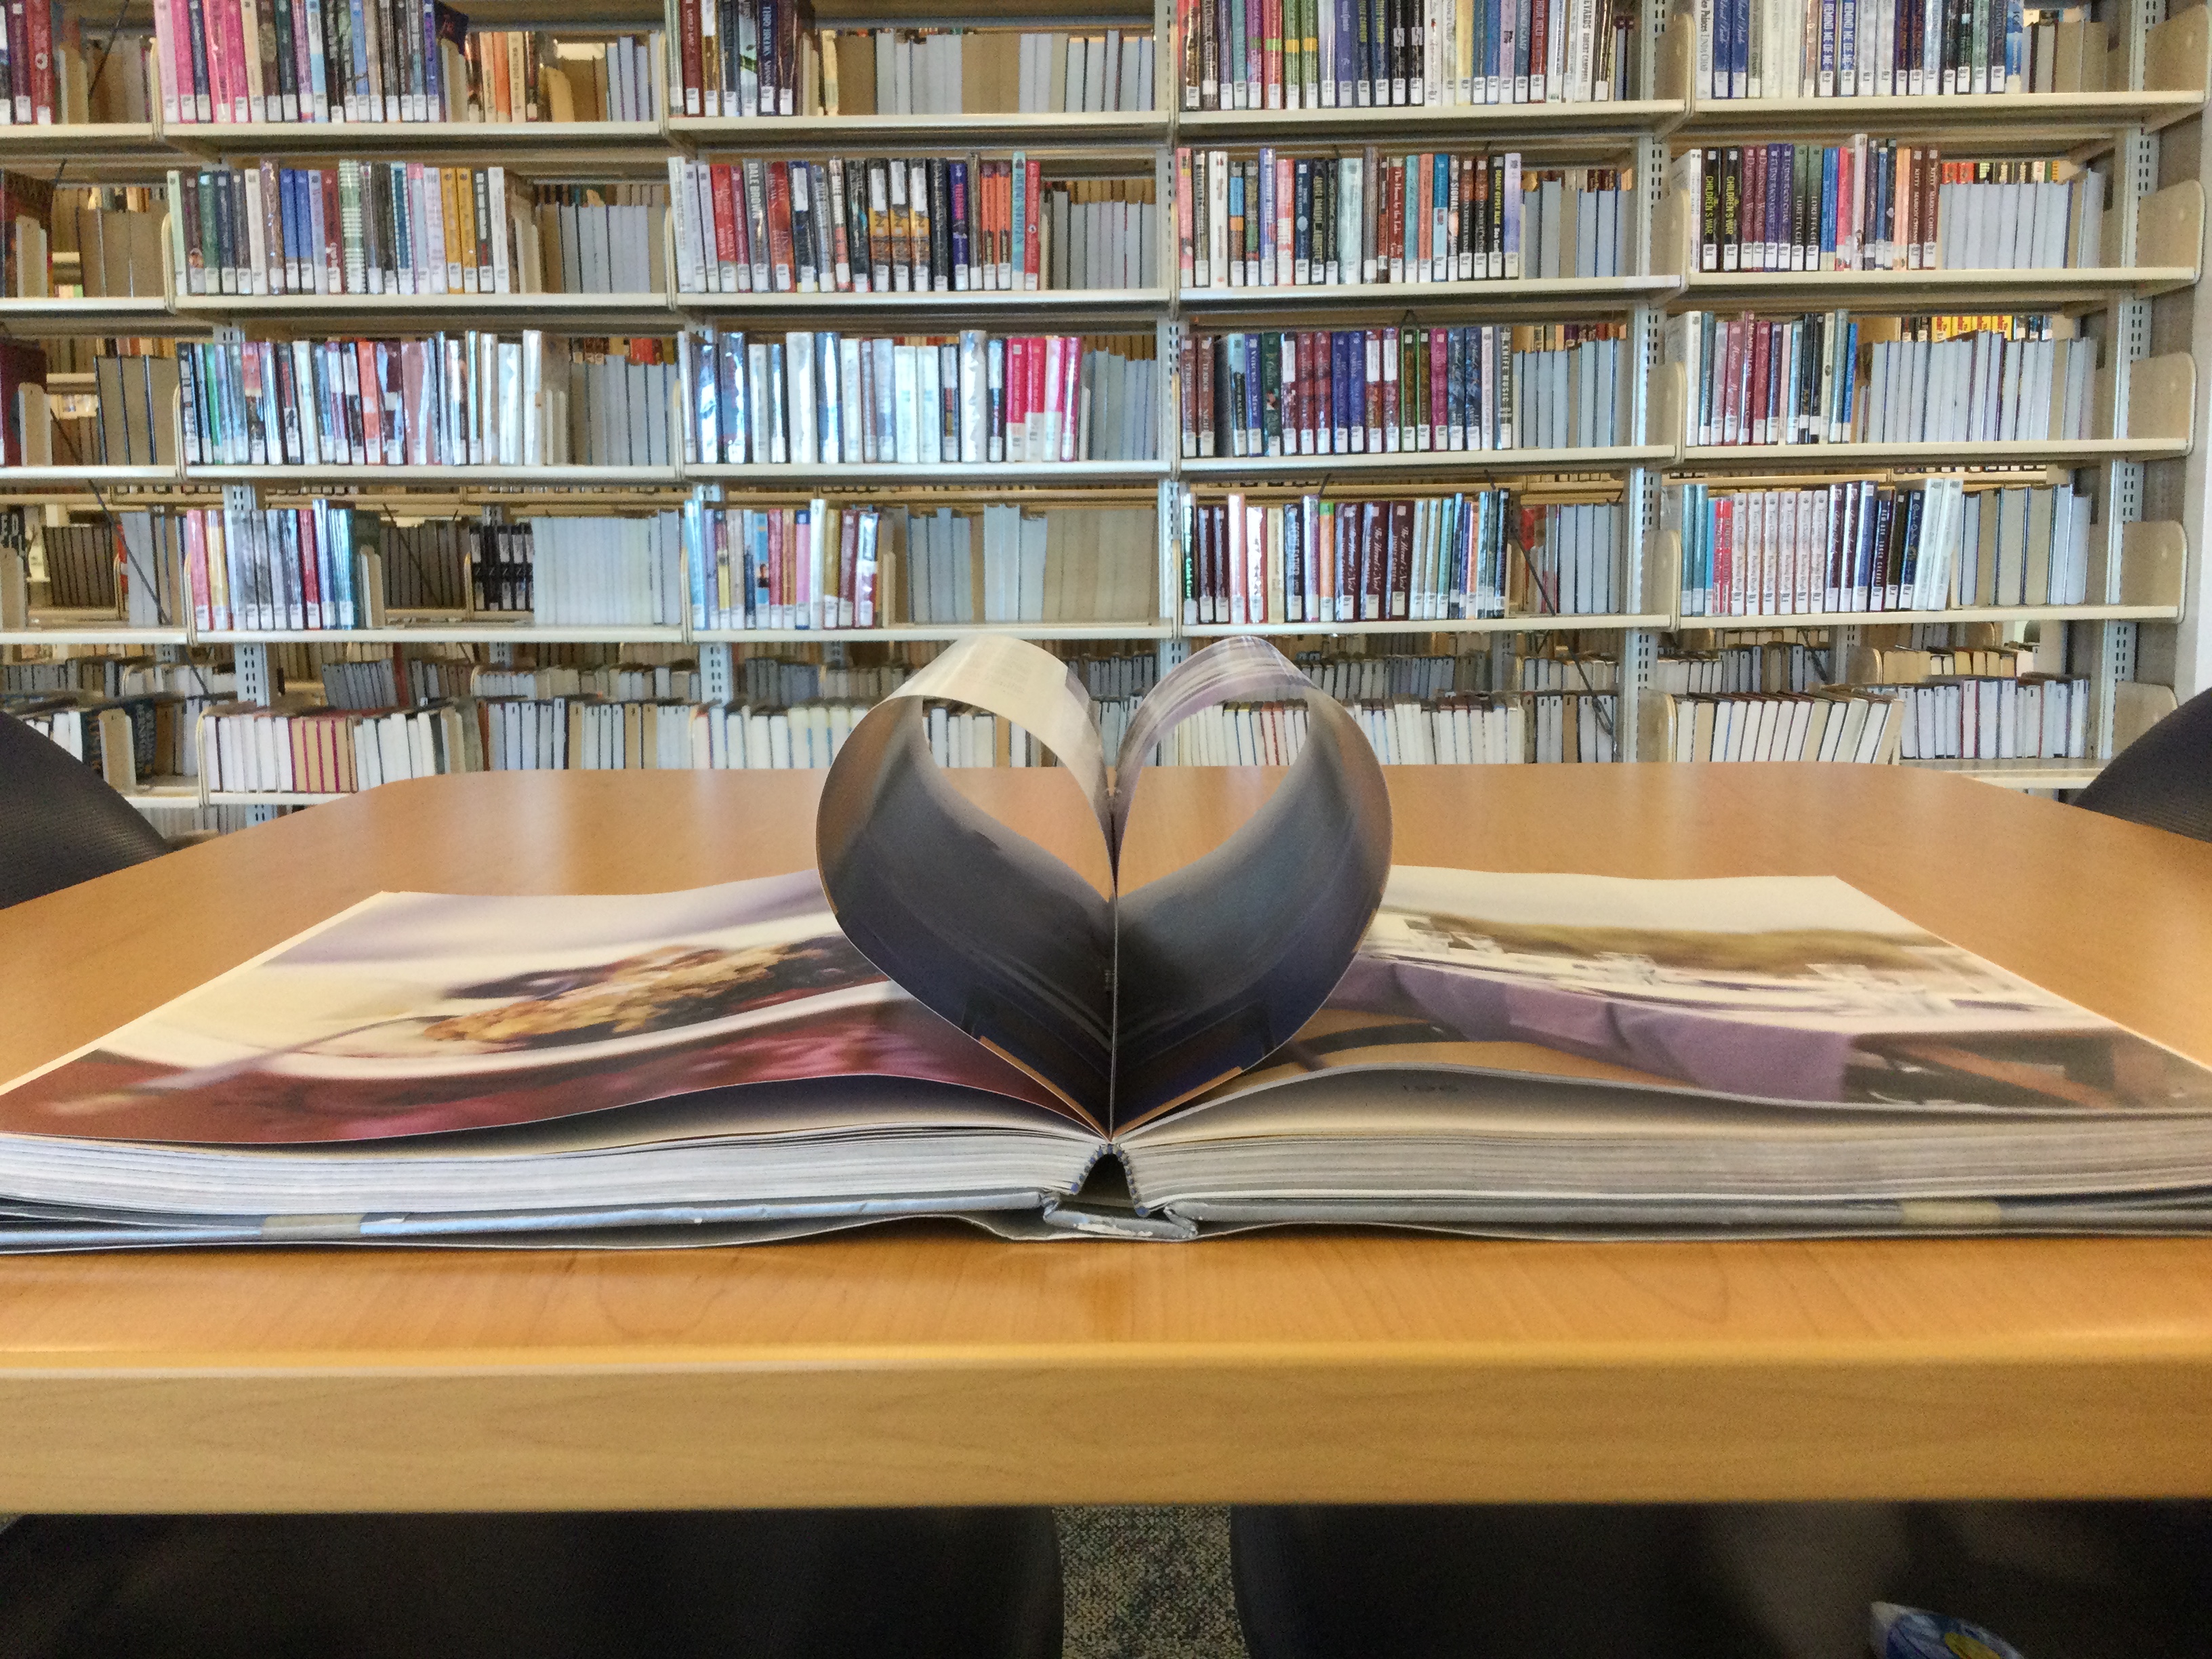 A book open on a table with its center pages folded in to resemble a heart